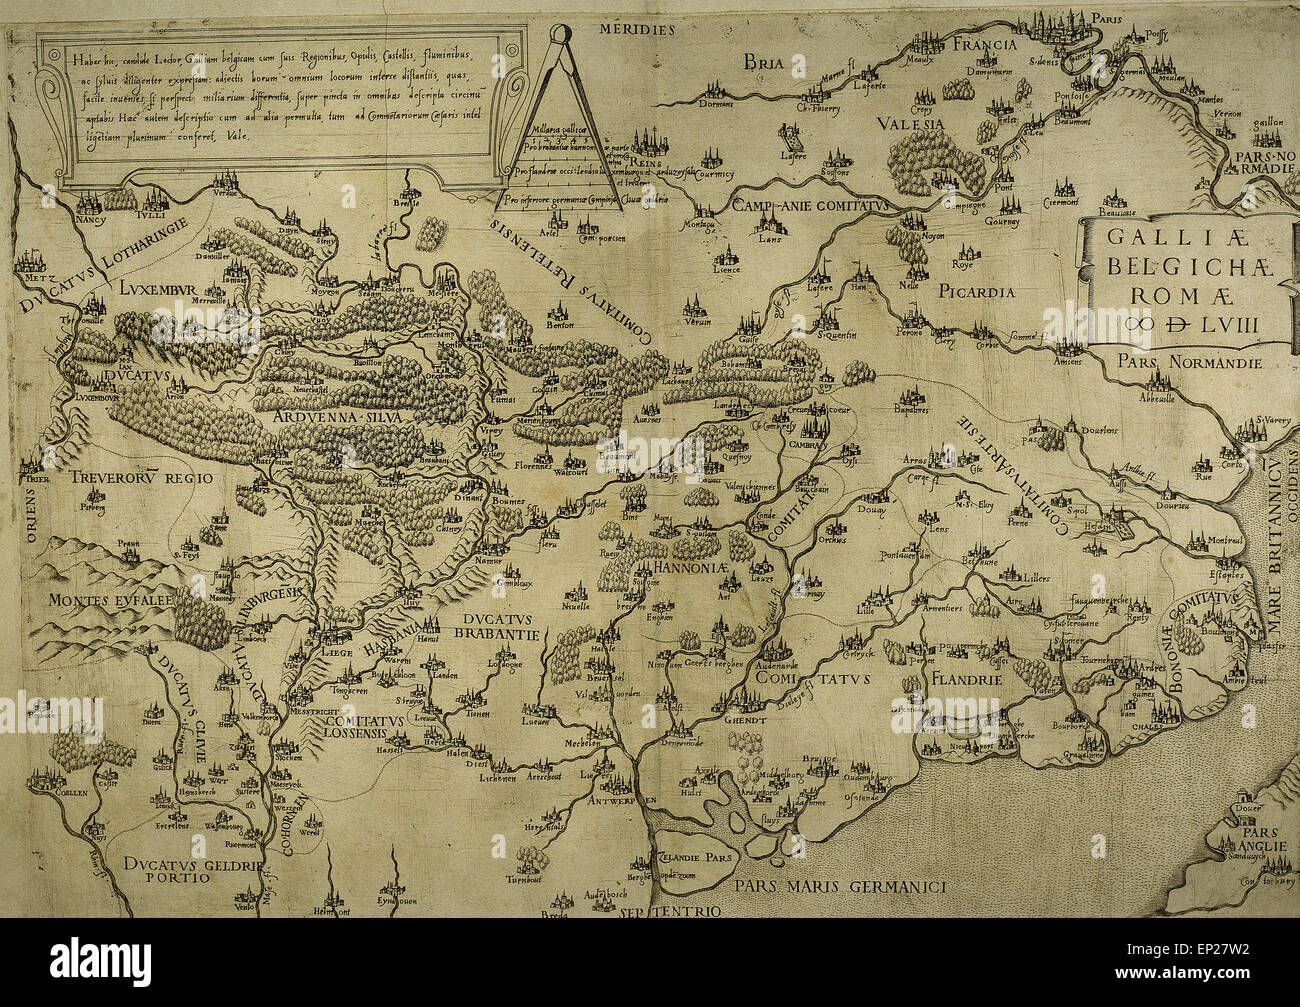 Map of Belgium, France and Luxembourg. Made by Michaelis Tramezini, 1558. Printed by Iacobus Bossius. Stock Photo